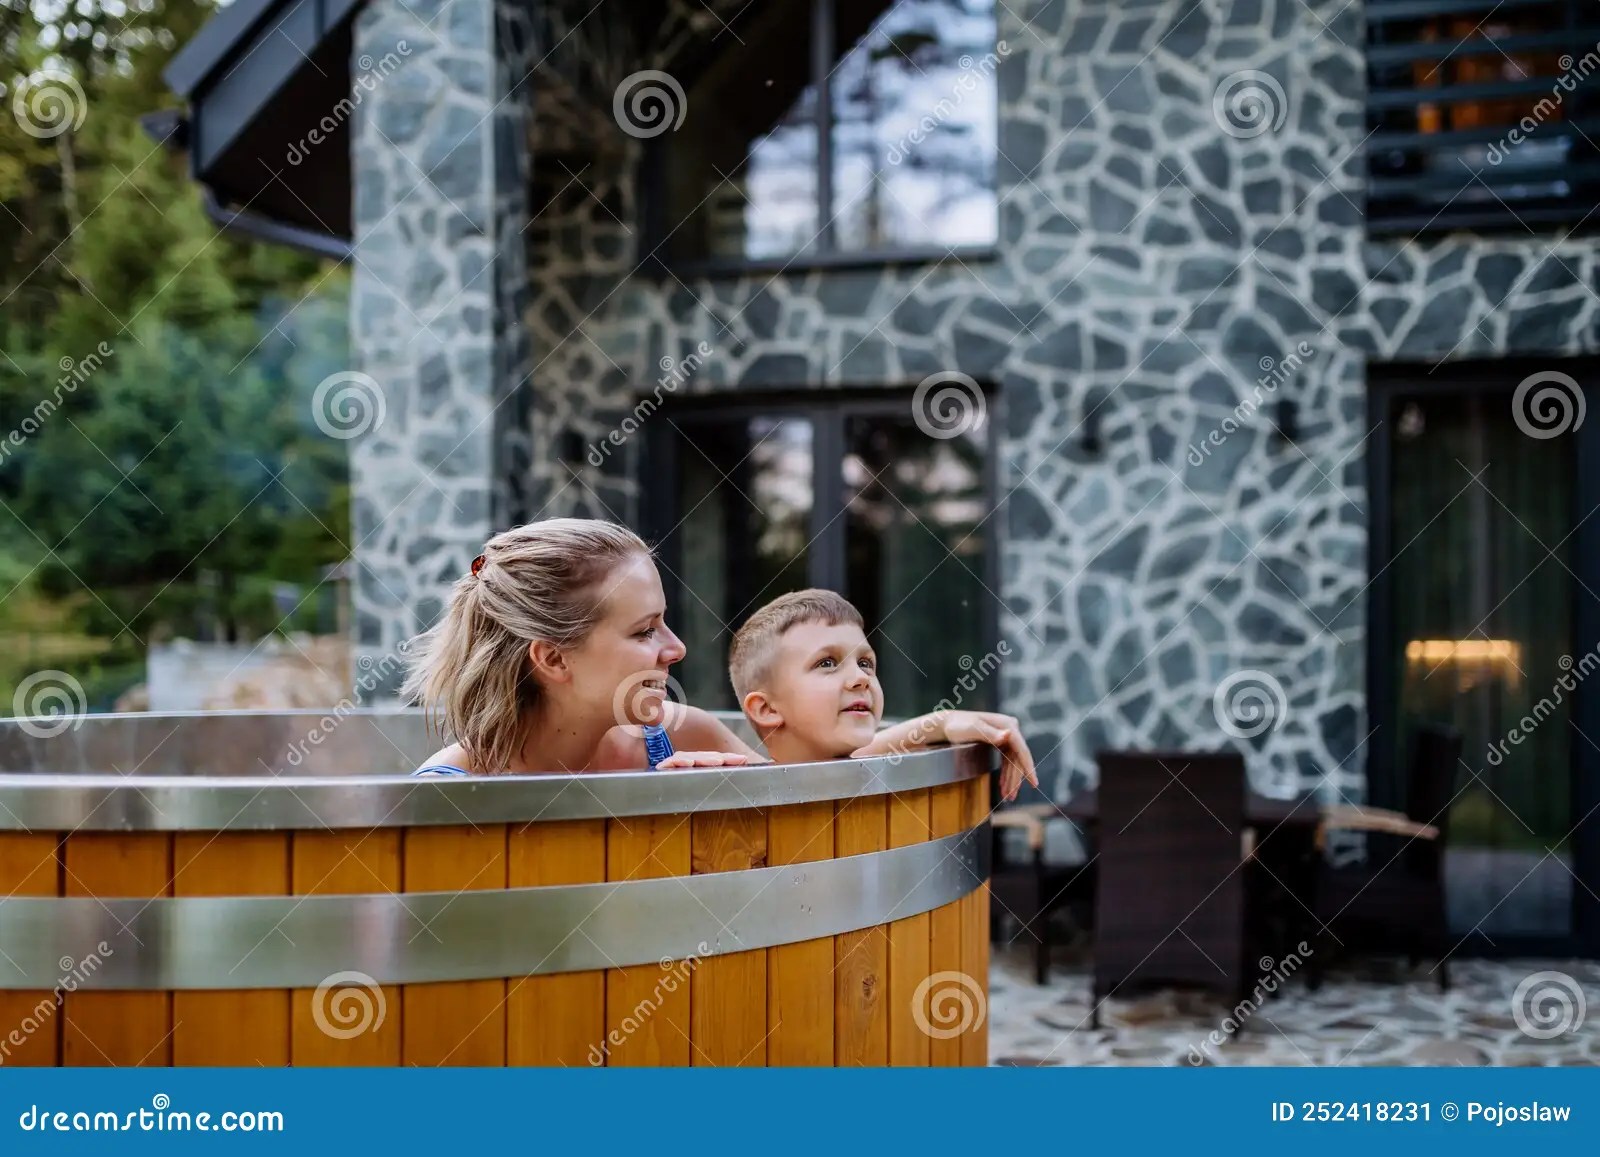 Mother with Her Little Son Enjoying Bathing in Wooden Barrel Hot Tub in